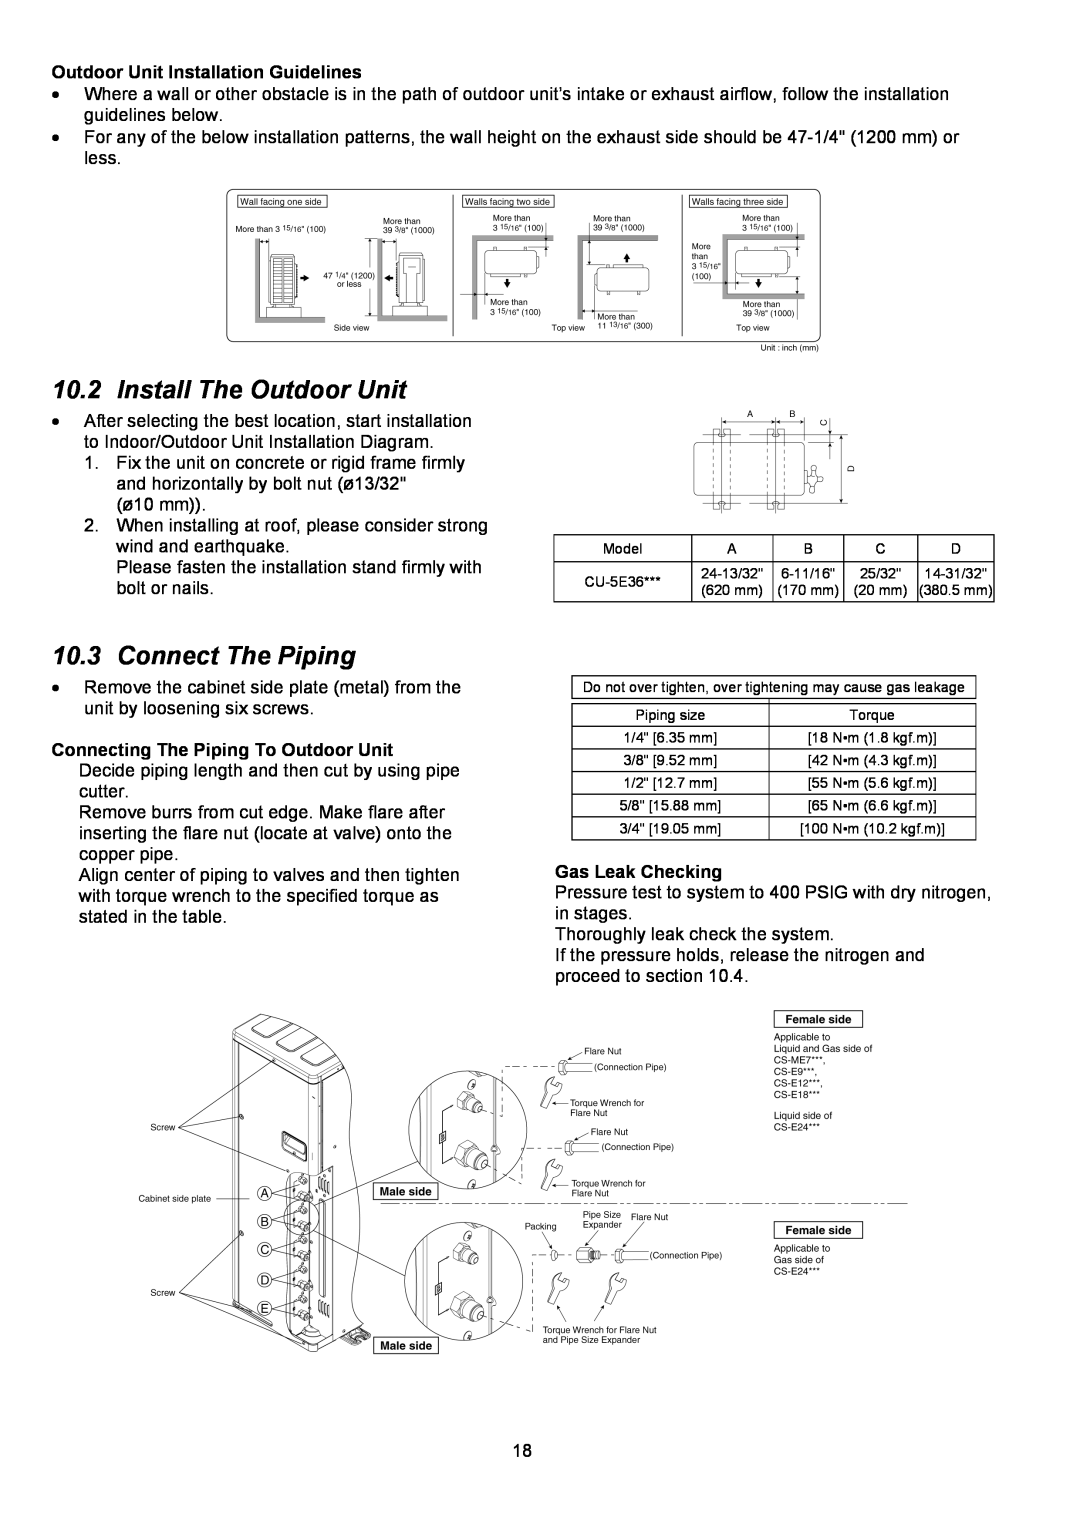 Panasonic CU-5E36QBU Install The Outdoor Unit, Connect The Piping, Outdoor Unit Installation Guidelines, Gas Leak Checking 